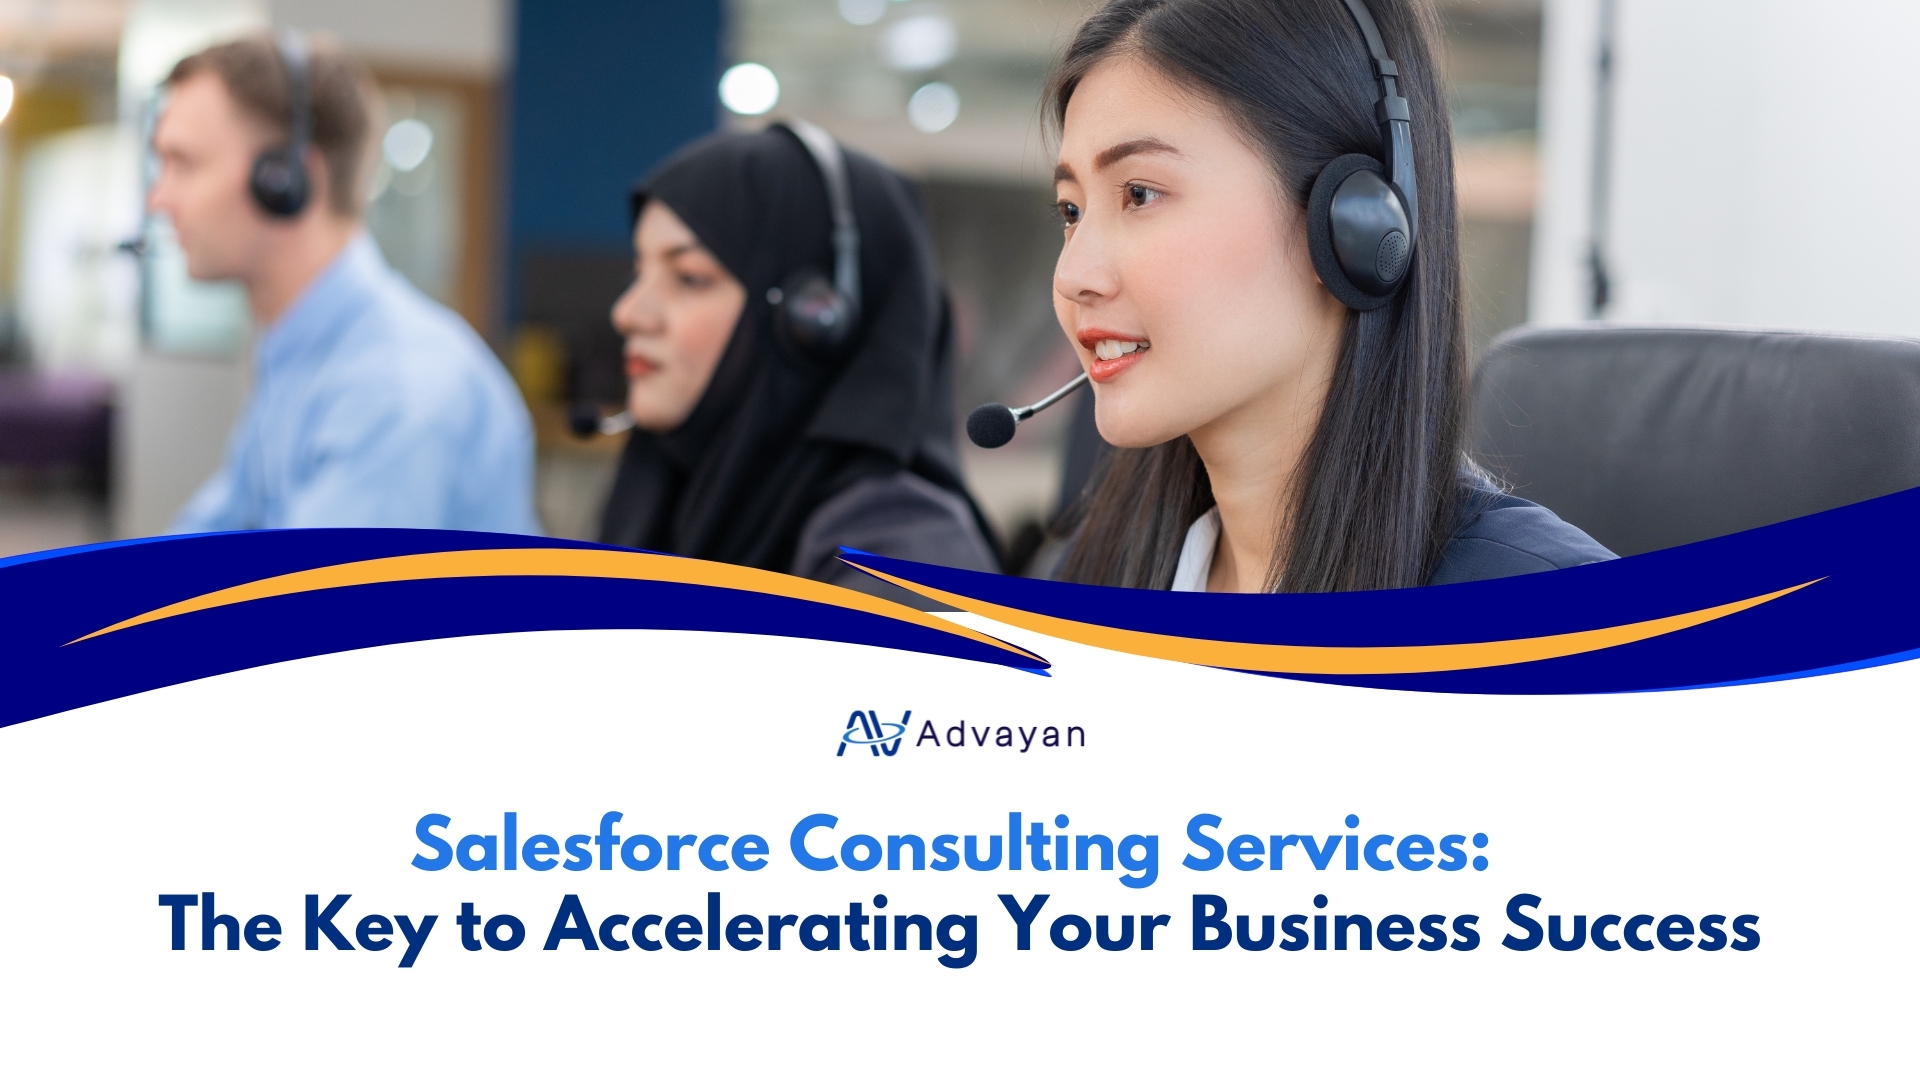 Salesforce Consulting Services: The Key to Accelerating Your Business Success - Advayan